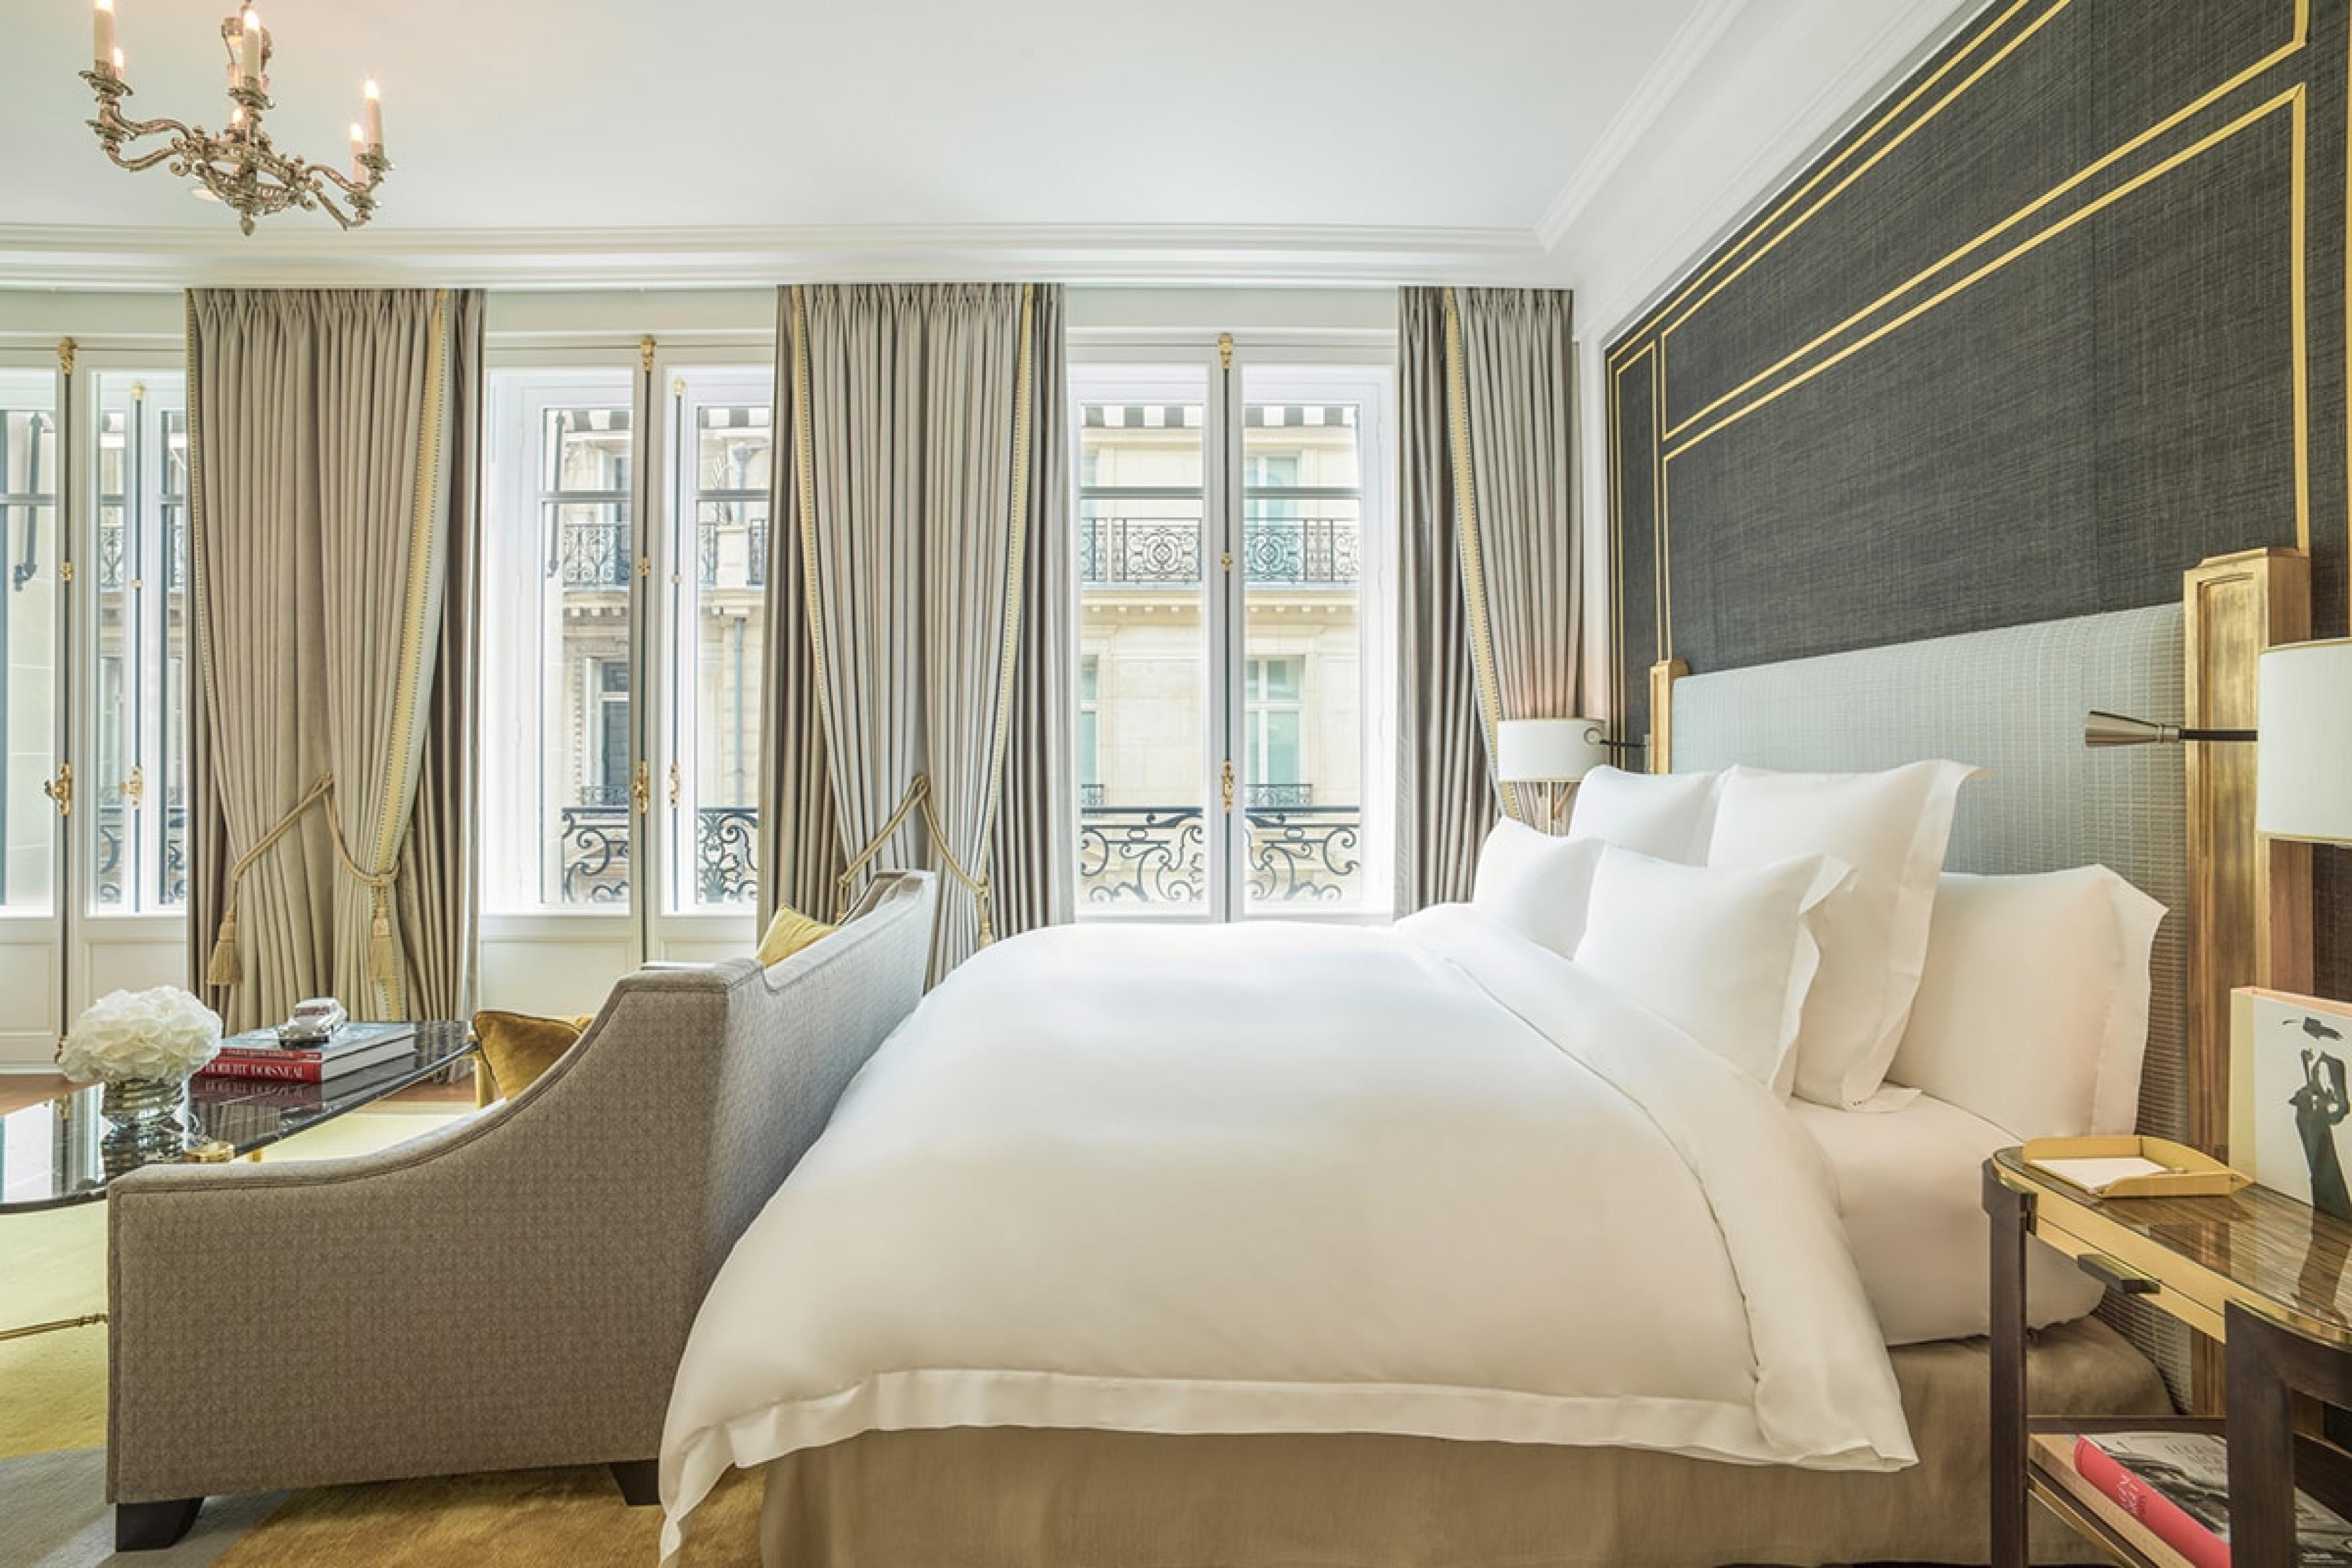 hotel room with white linens and gray headboard and windows looking out to paris buildings across street